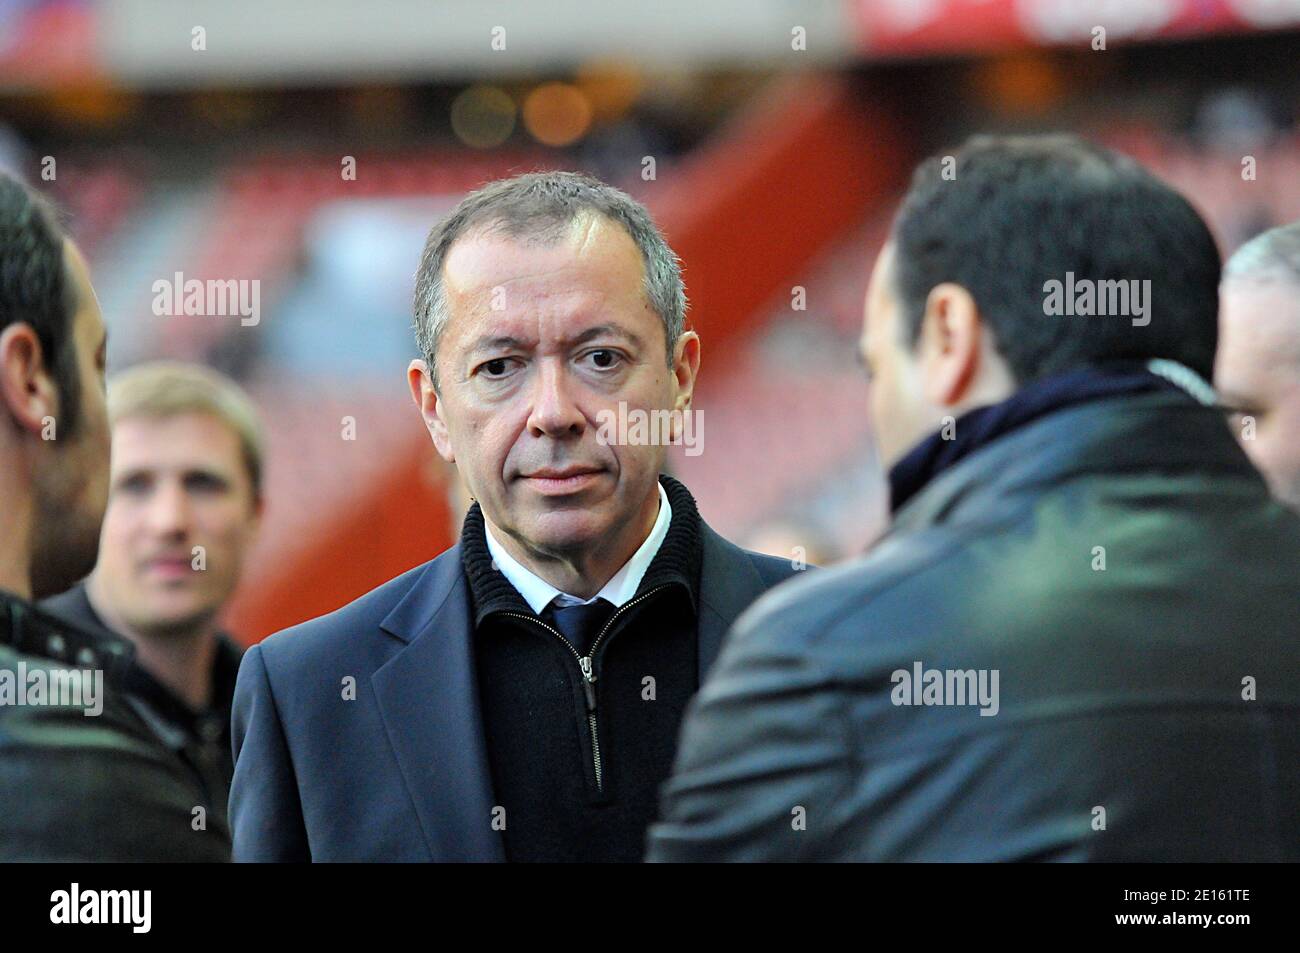 PSG's football team president Robin Leproux during the French First League soccer match, Paris Saint-Germain vs Olympique Lyonnais in Paris, France on April 17, 2011. PSG won 1-0. Photo by Thierry Plessis/ABACAPRESS.COM Stock Photo